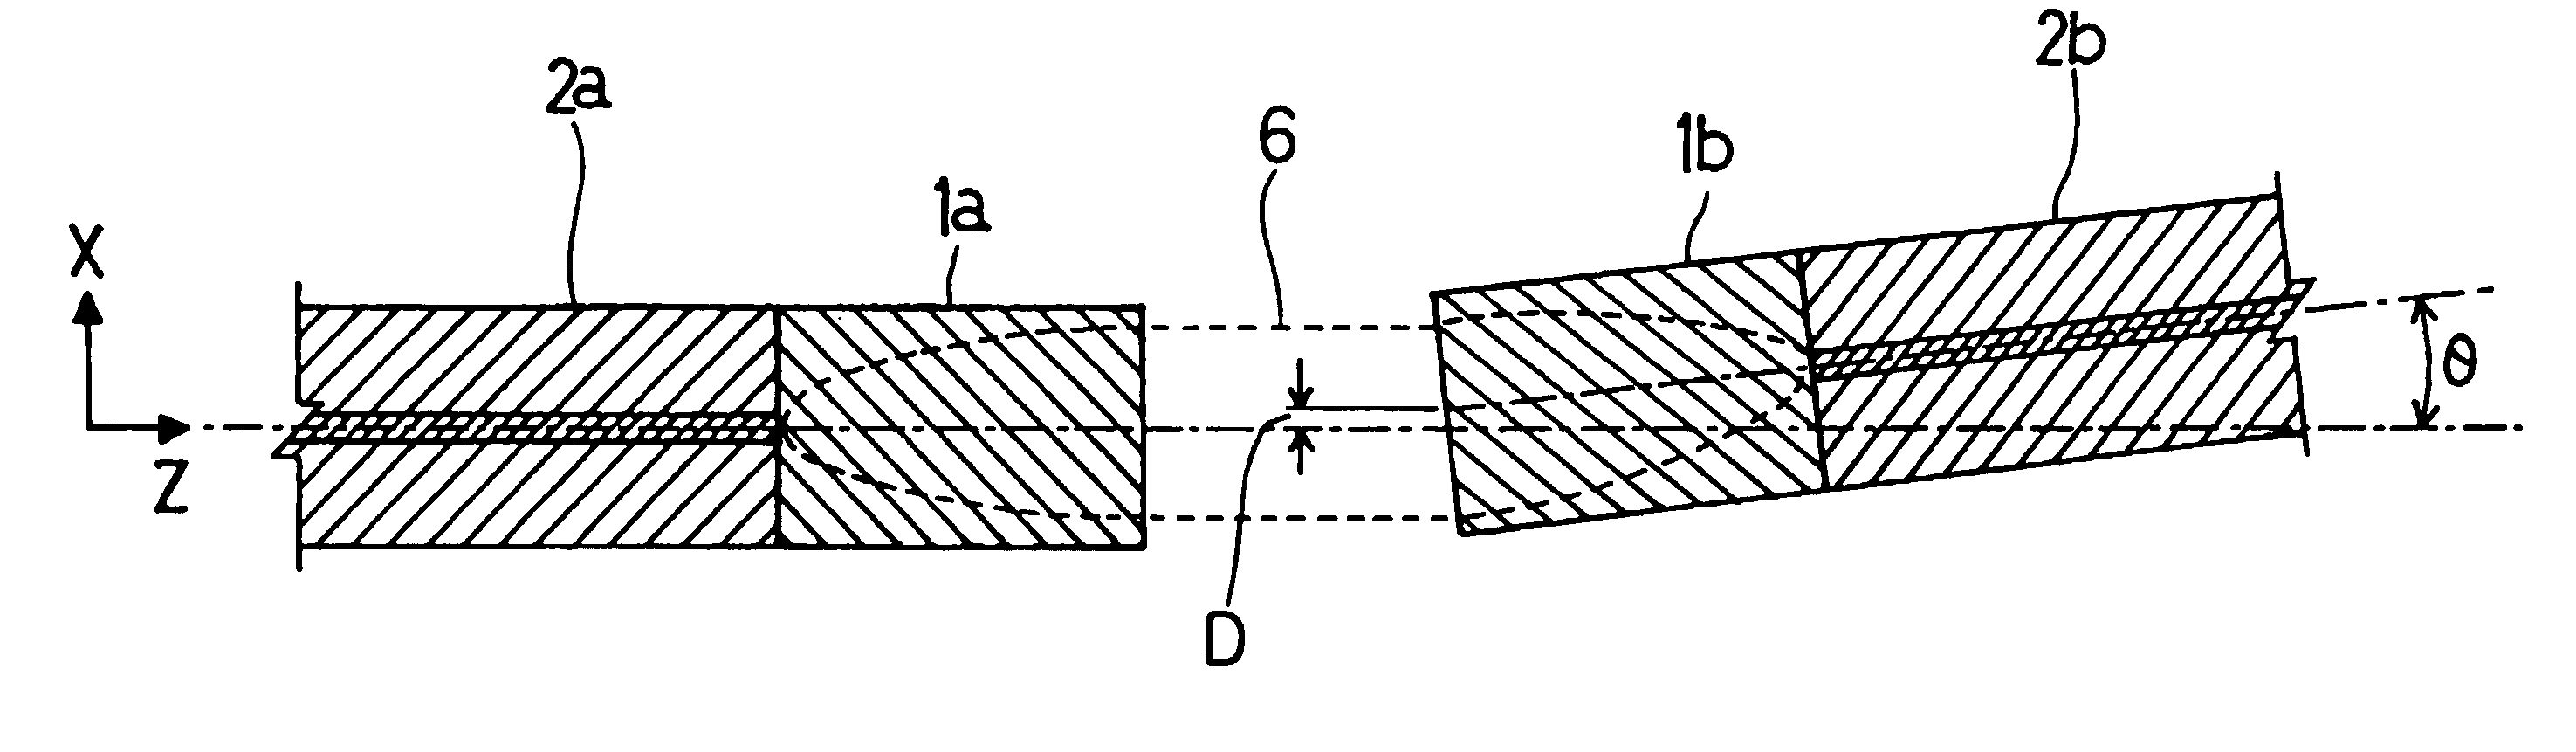 Fiber optic collimator system, fiber optic collimator array, and manufacturing method of the fiber optic collimator system and fiber optic collimator array system